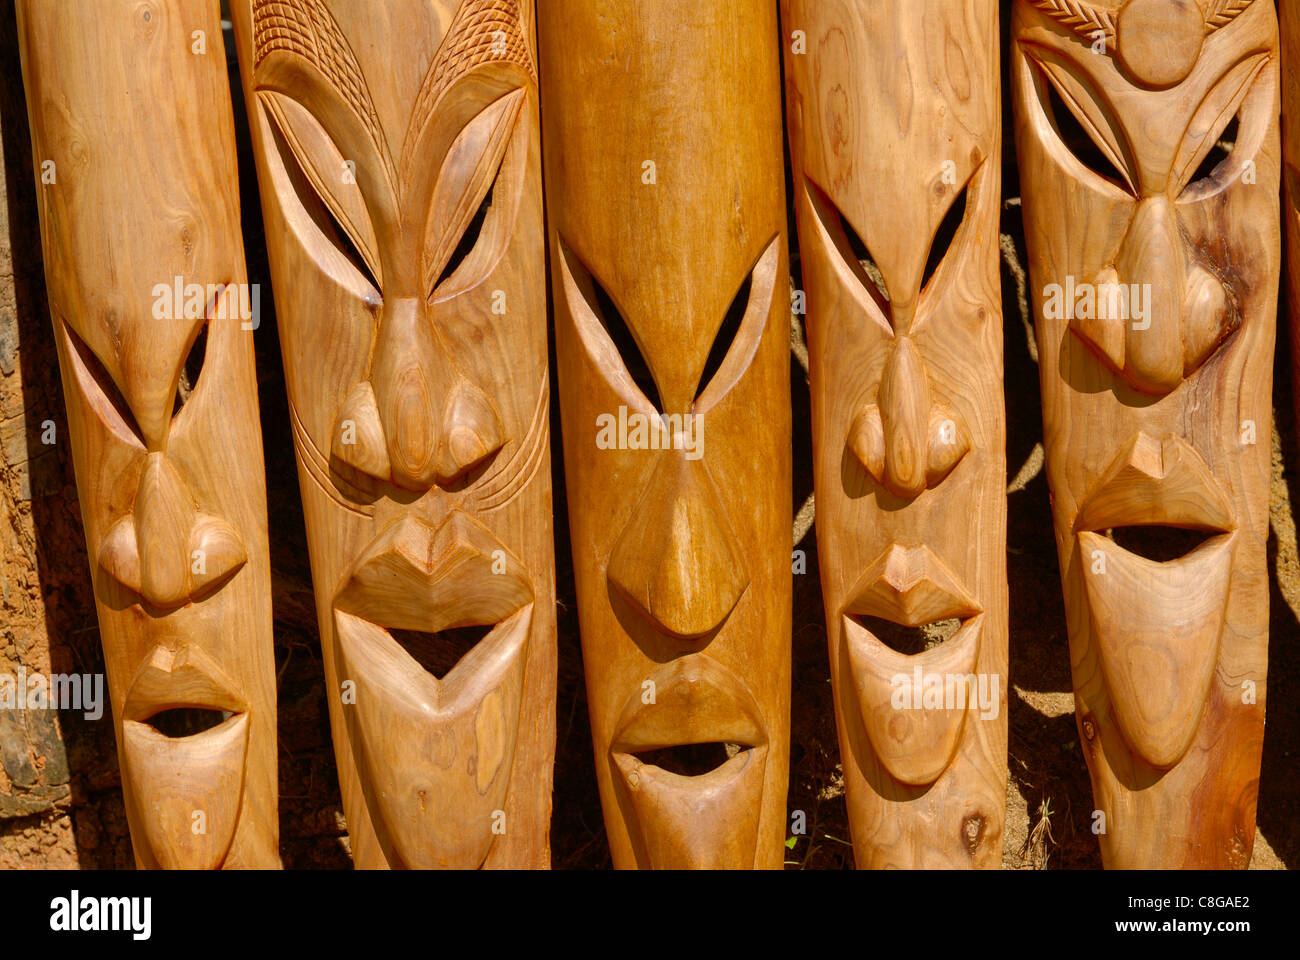 Wooden carved heads for sale, Nosy Be, Madagascar Stock Photo